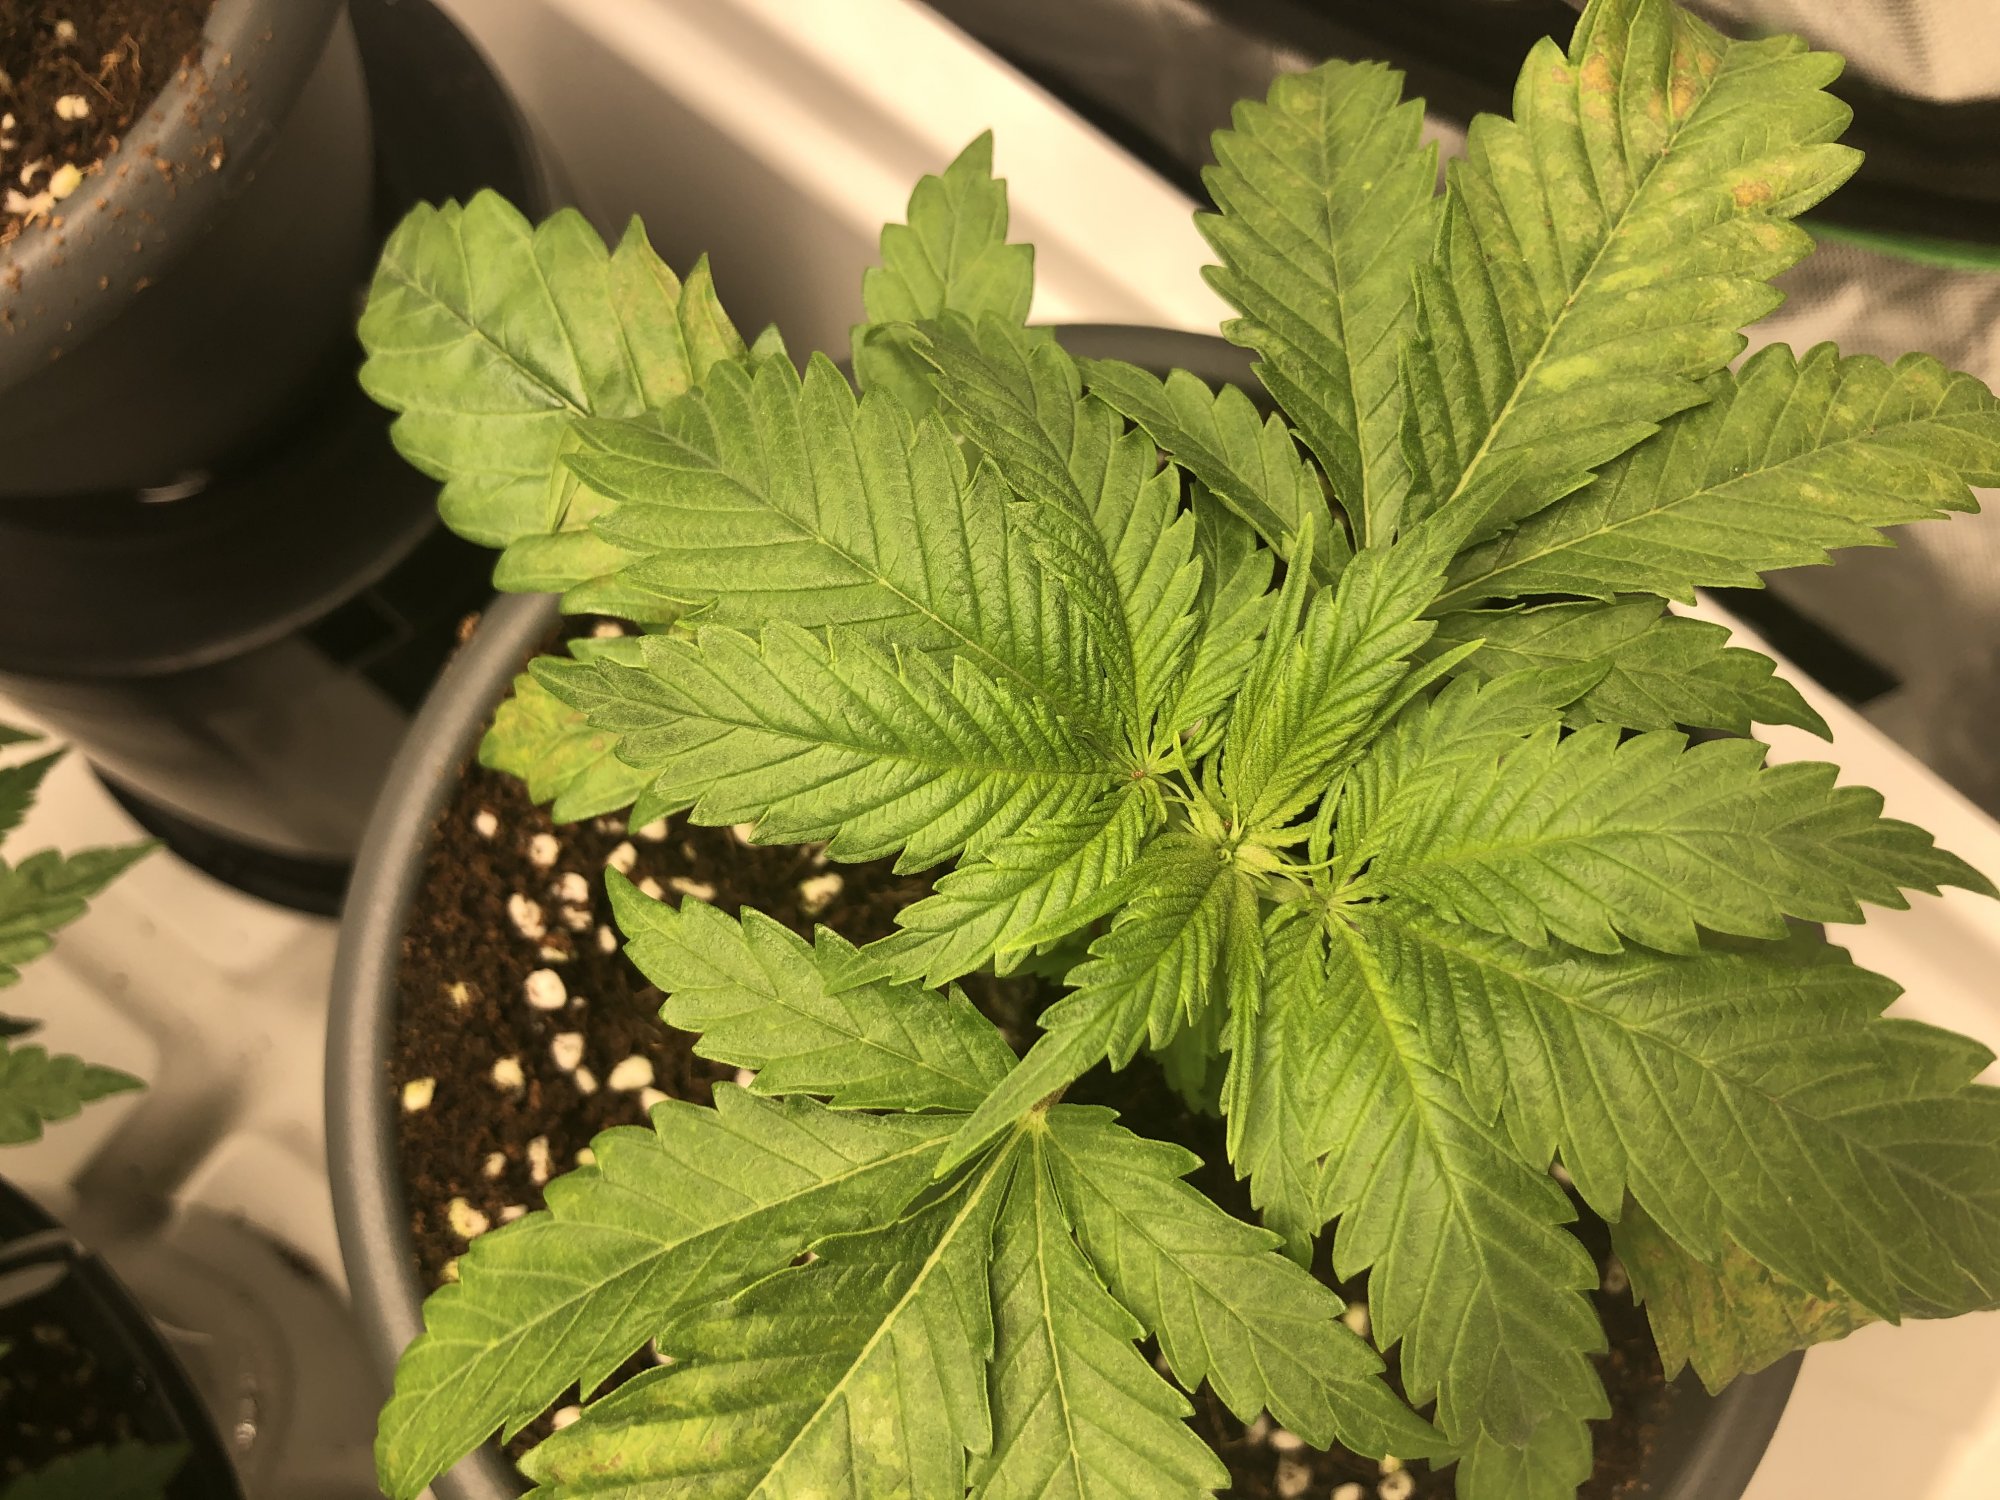 Can anyone identify the deficiency here 2